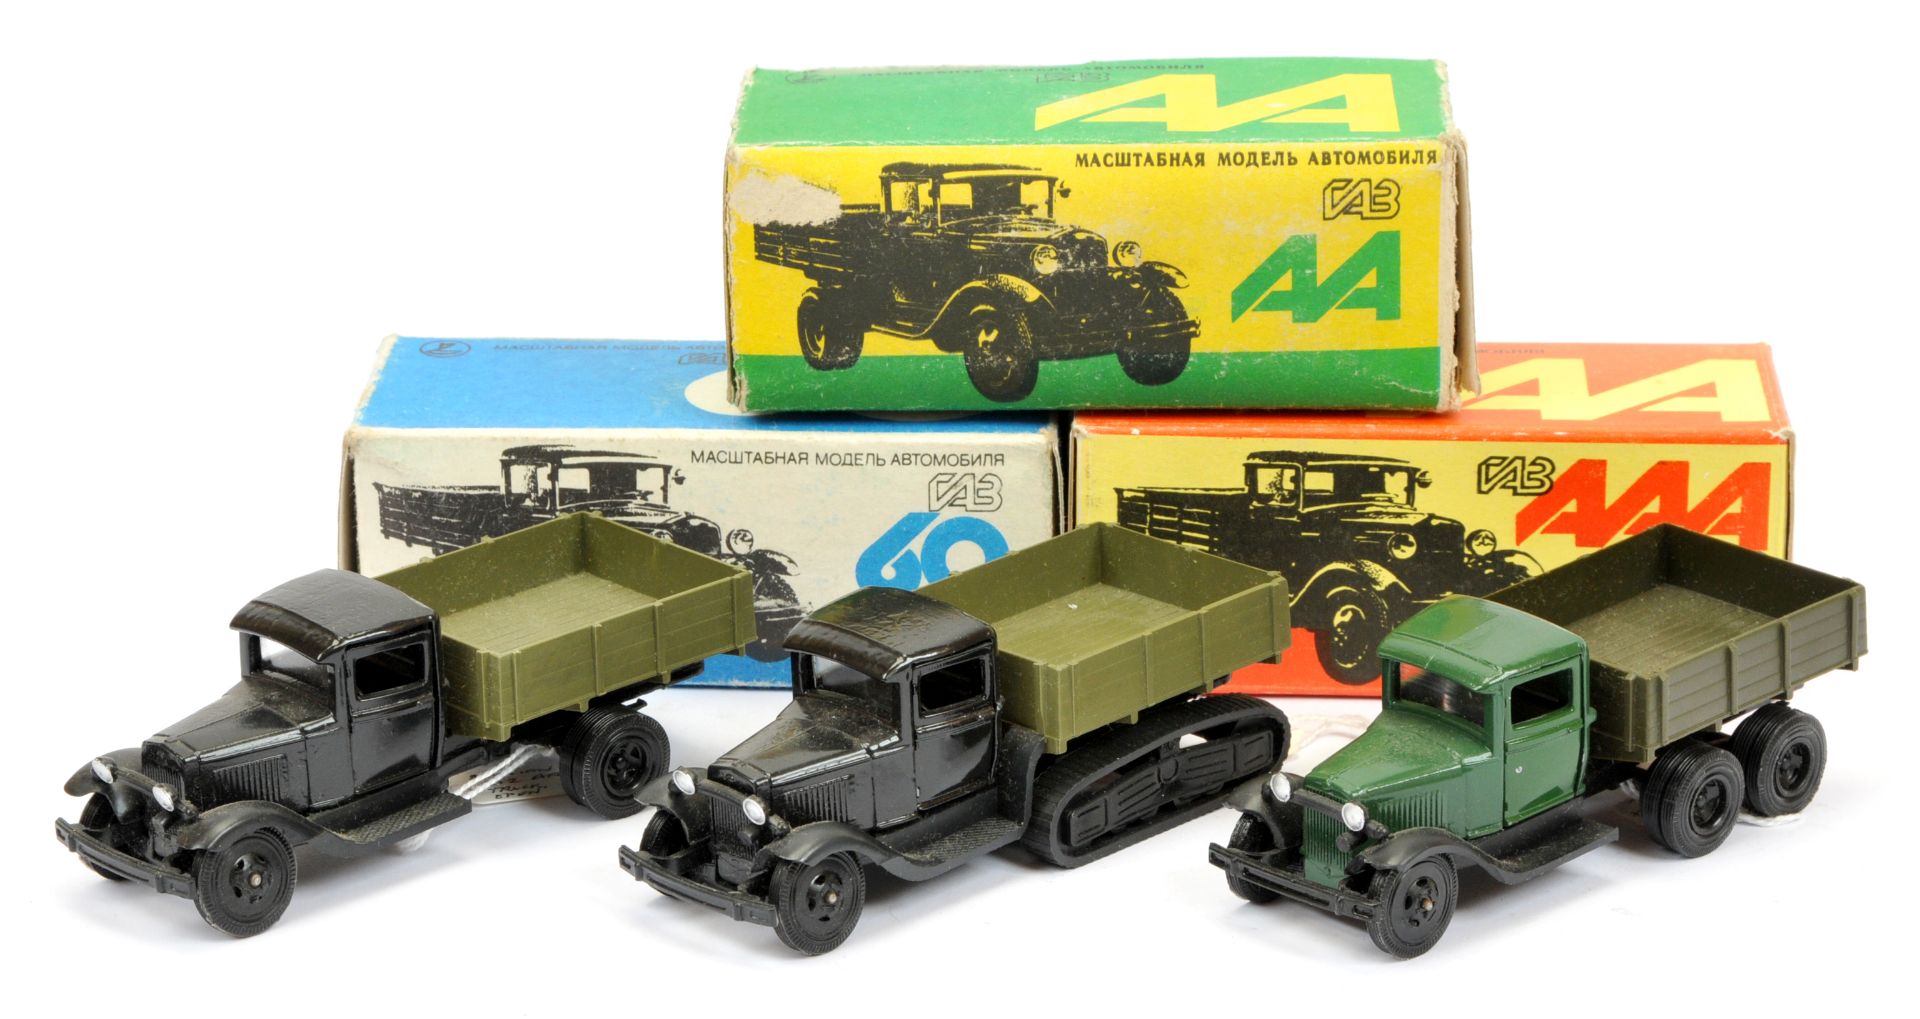 Russain made group 3  of military (1/43rd) scale open back trucks -(1) green cab with military gr...